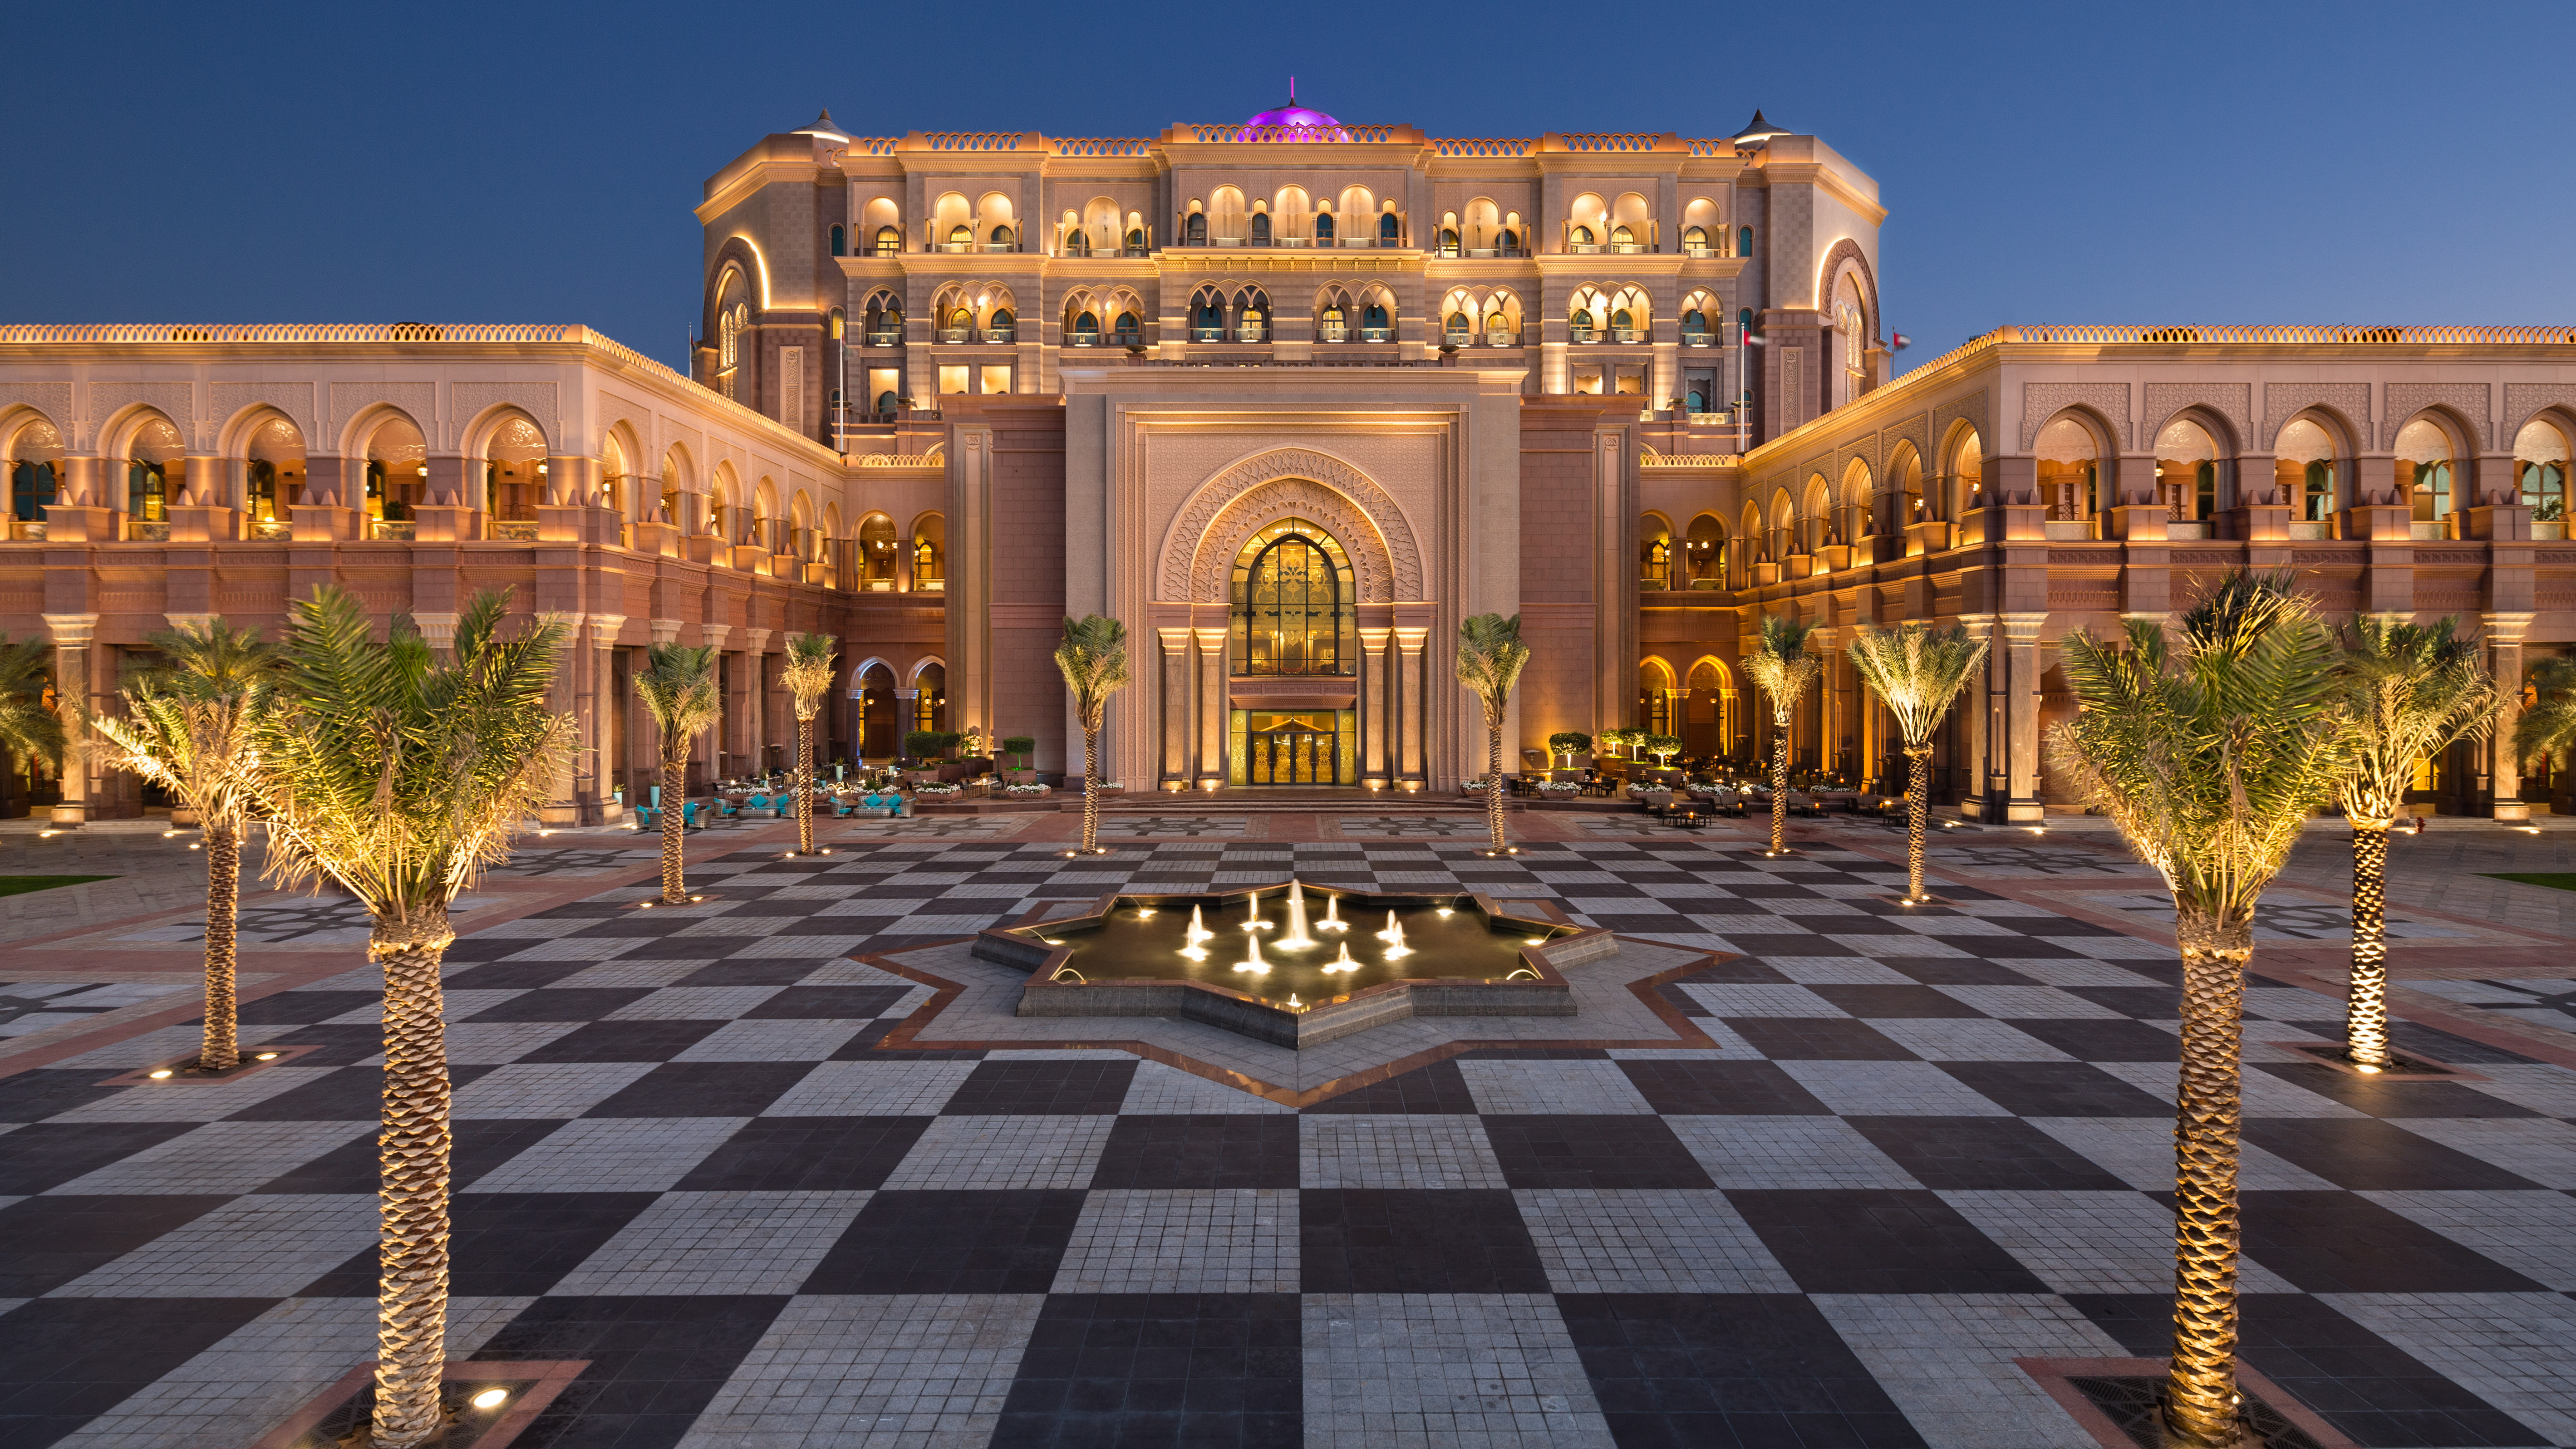 1. Spend the night at Emirates Palace